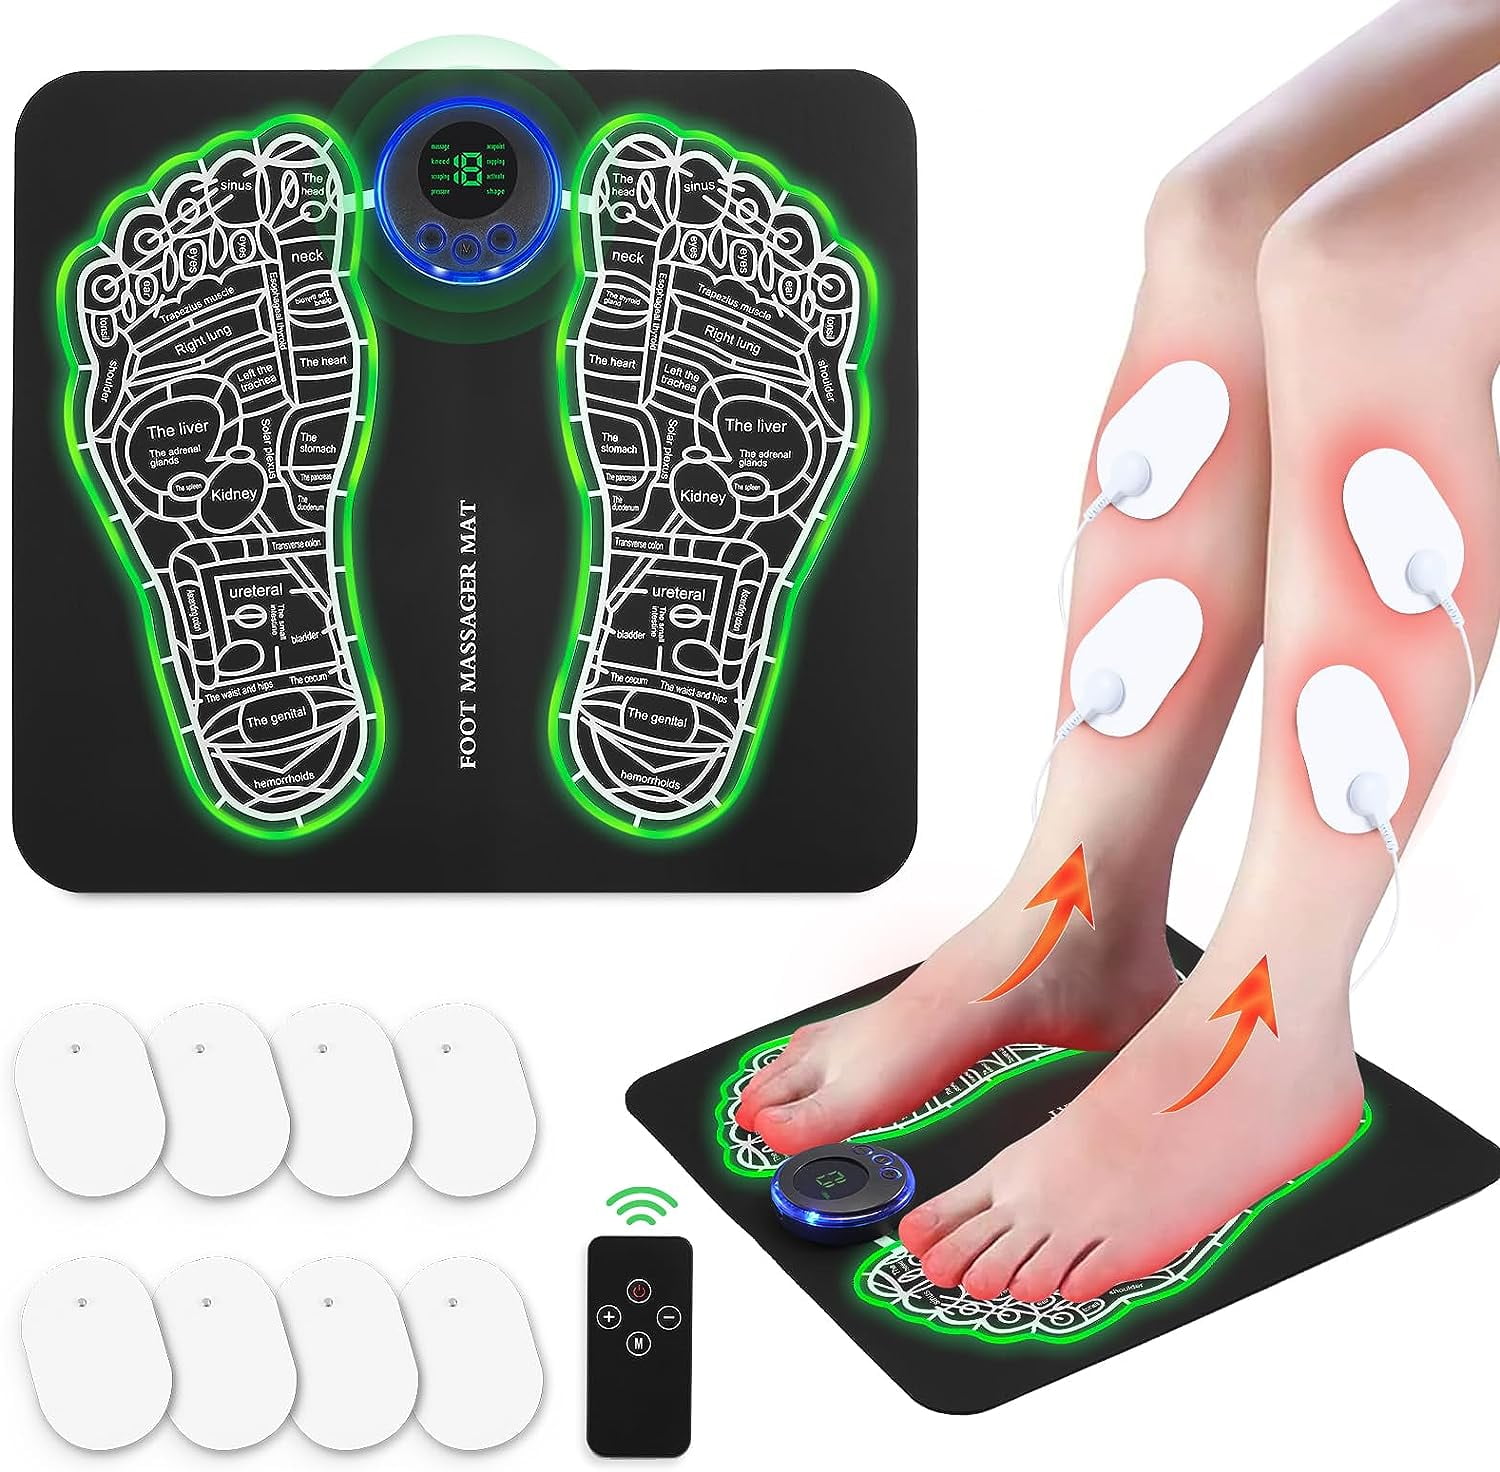 Intelligent EMS Foot Massage Pad with Remote Control,Pulse Physiotherapy Foot Pad,Micro-current Foot Massager for Leg Shaping and Slimming,Foot